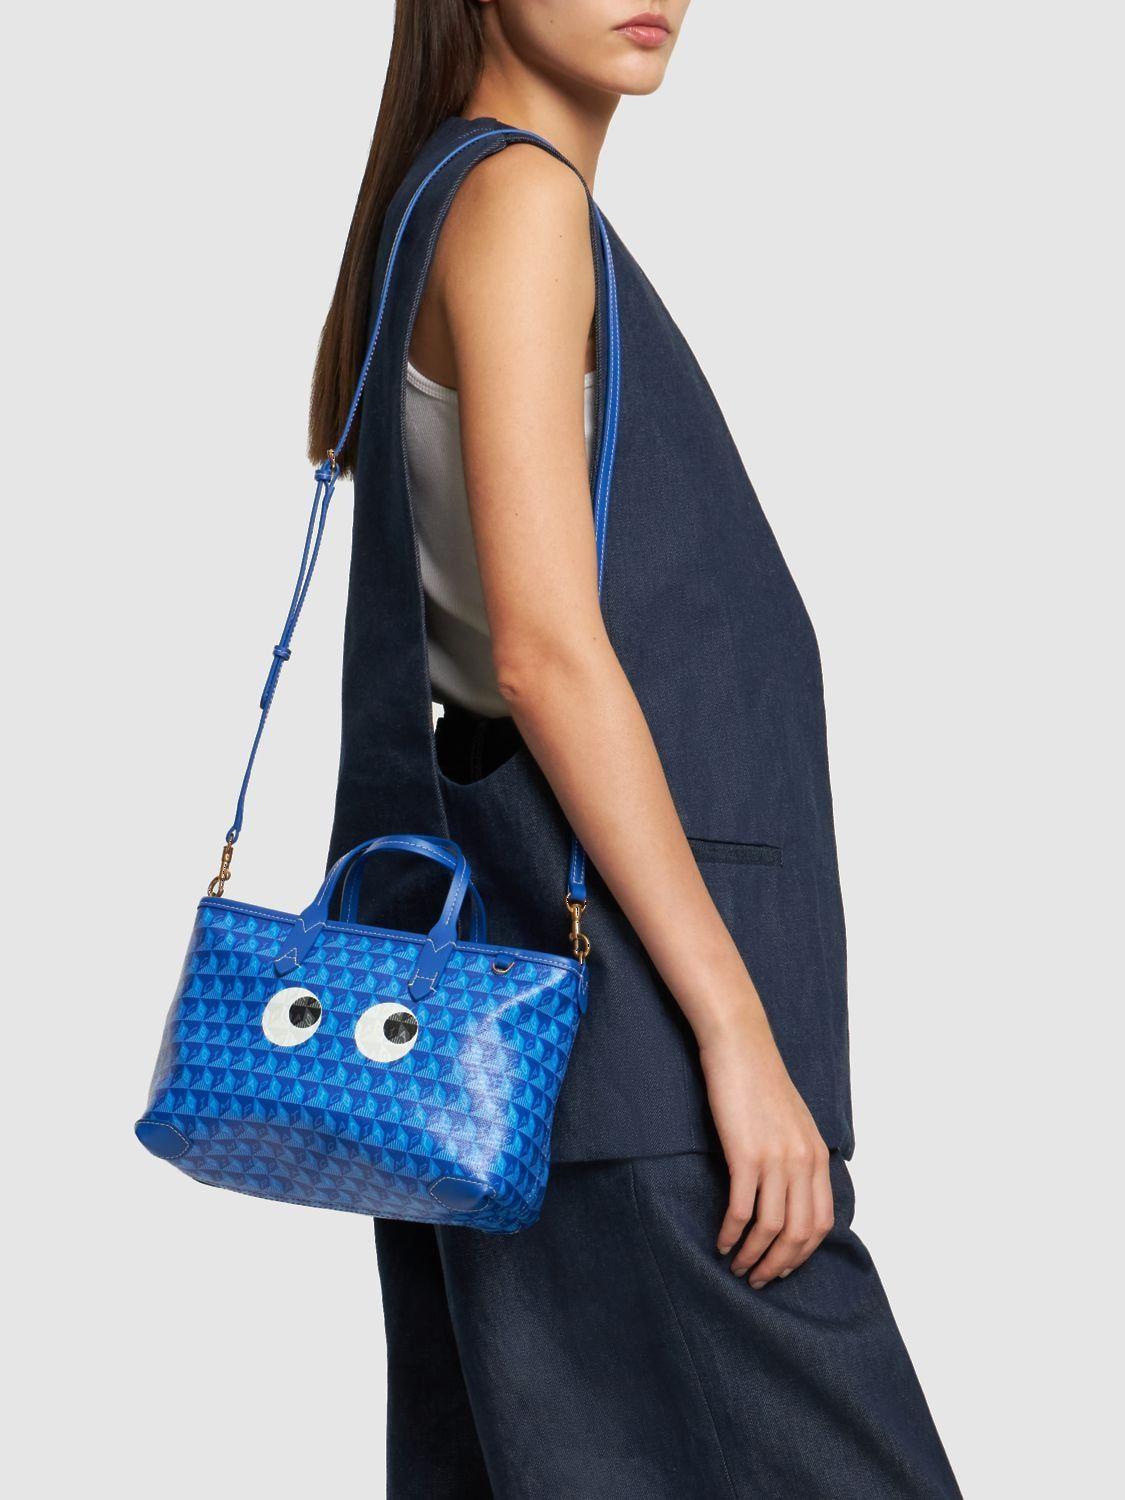 Anya Hindmarch Xs I Am A Plastic Bag Eyes Tote Bag in Blue | Lyst